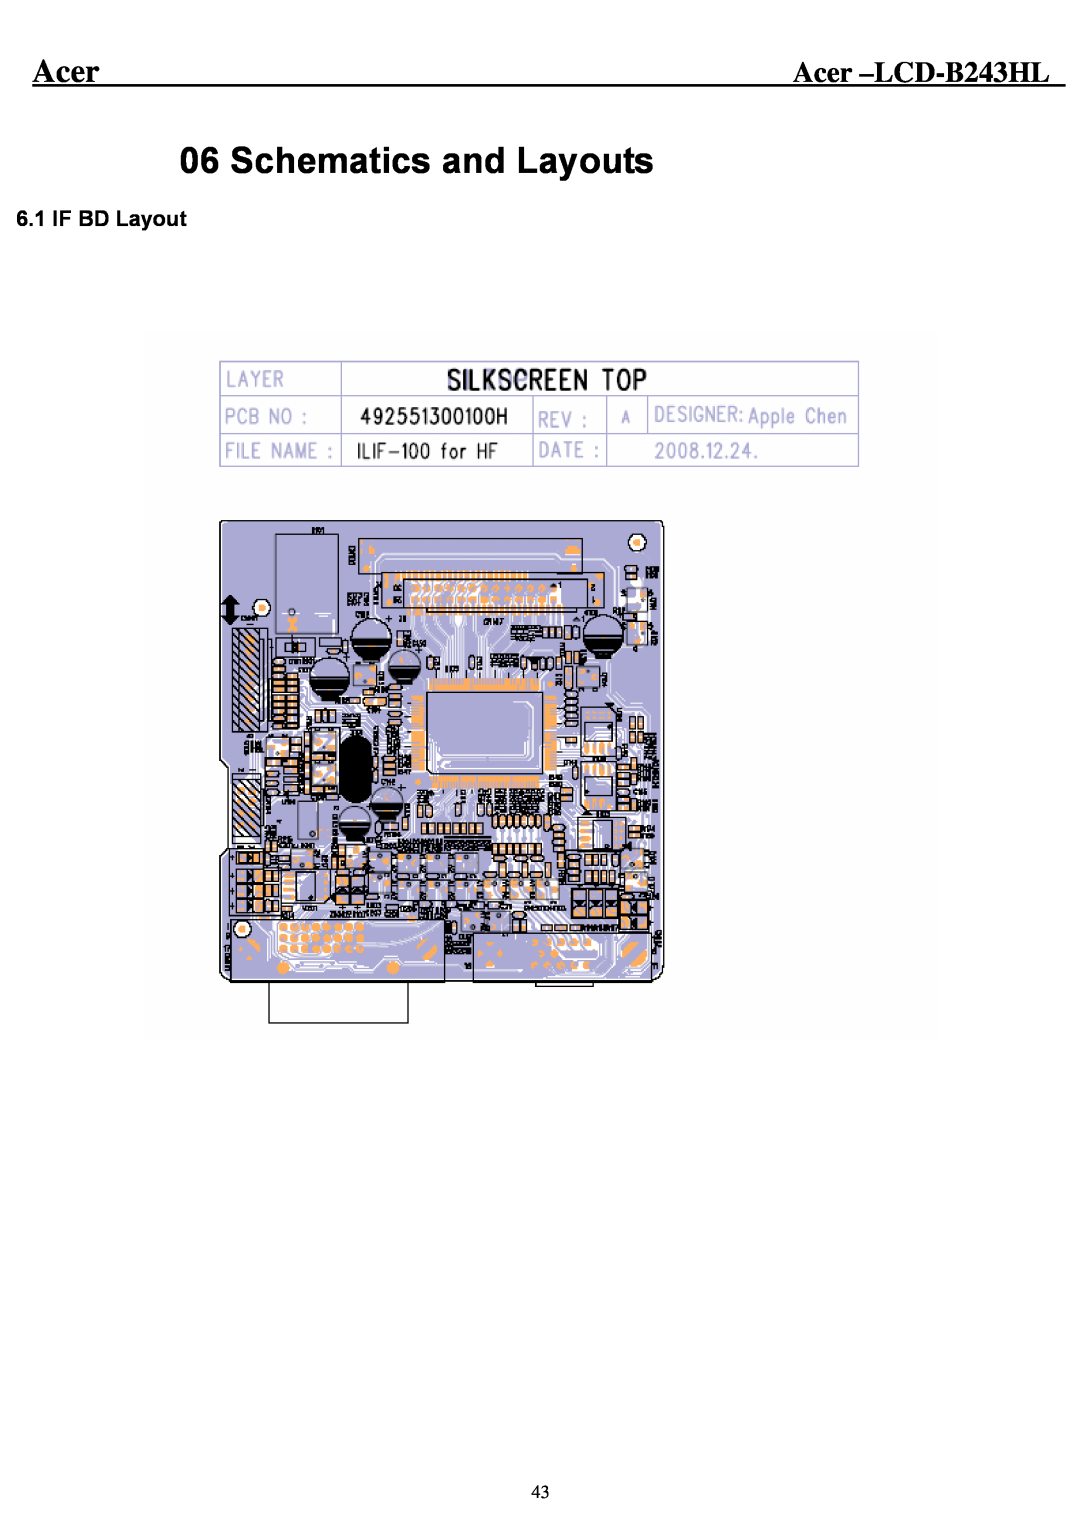 Acer service manual Schematics and Layouts, IF BD Layout, Acer -LCD-B243HL 